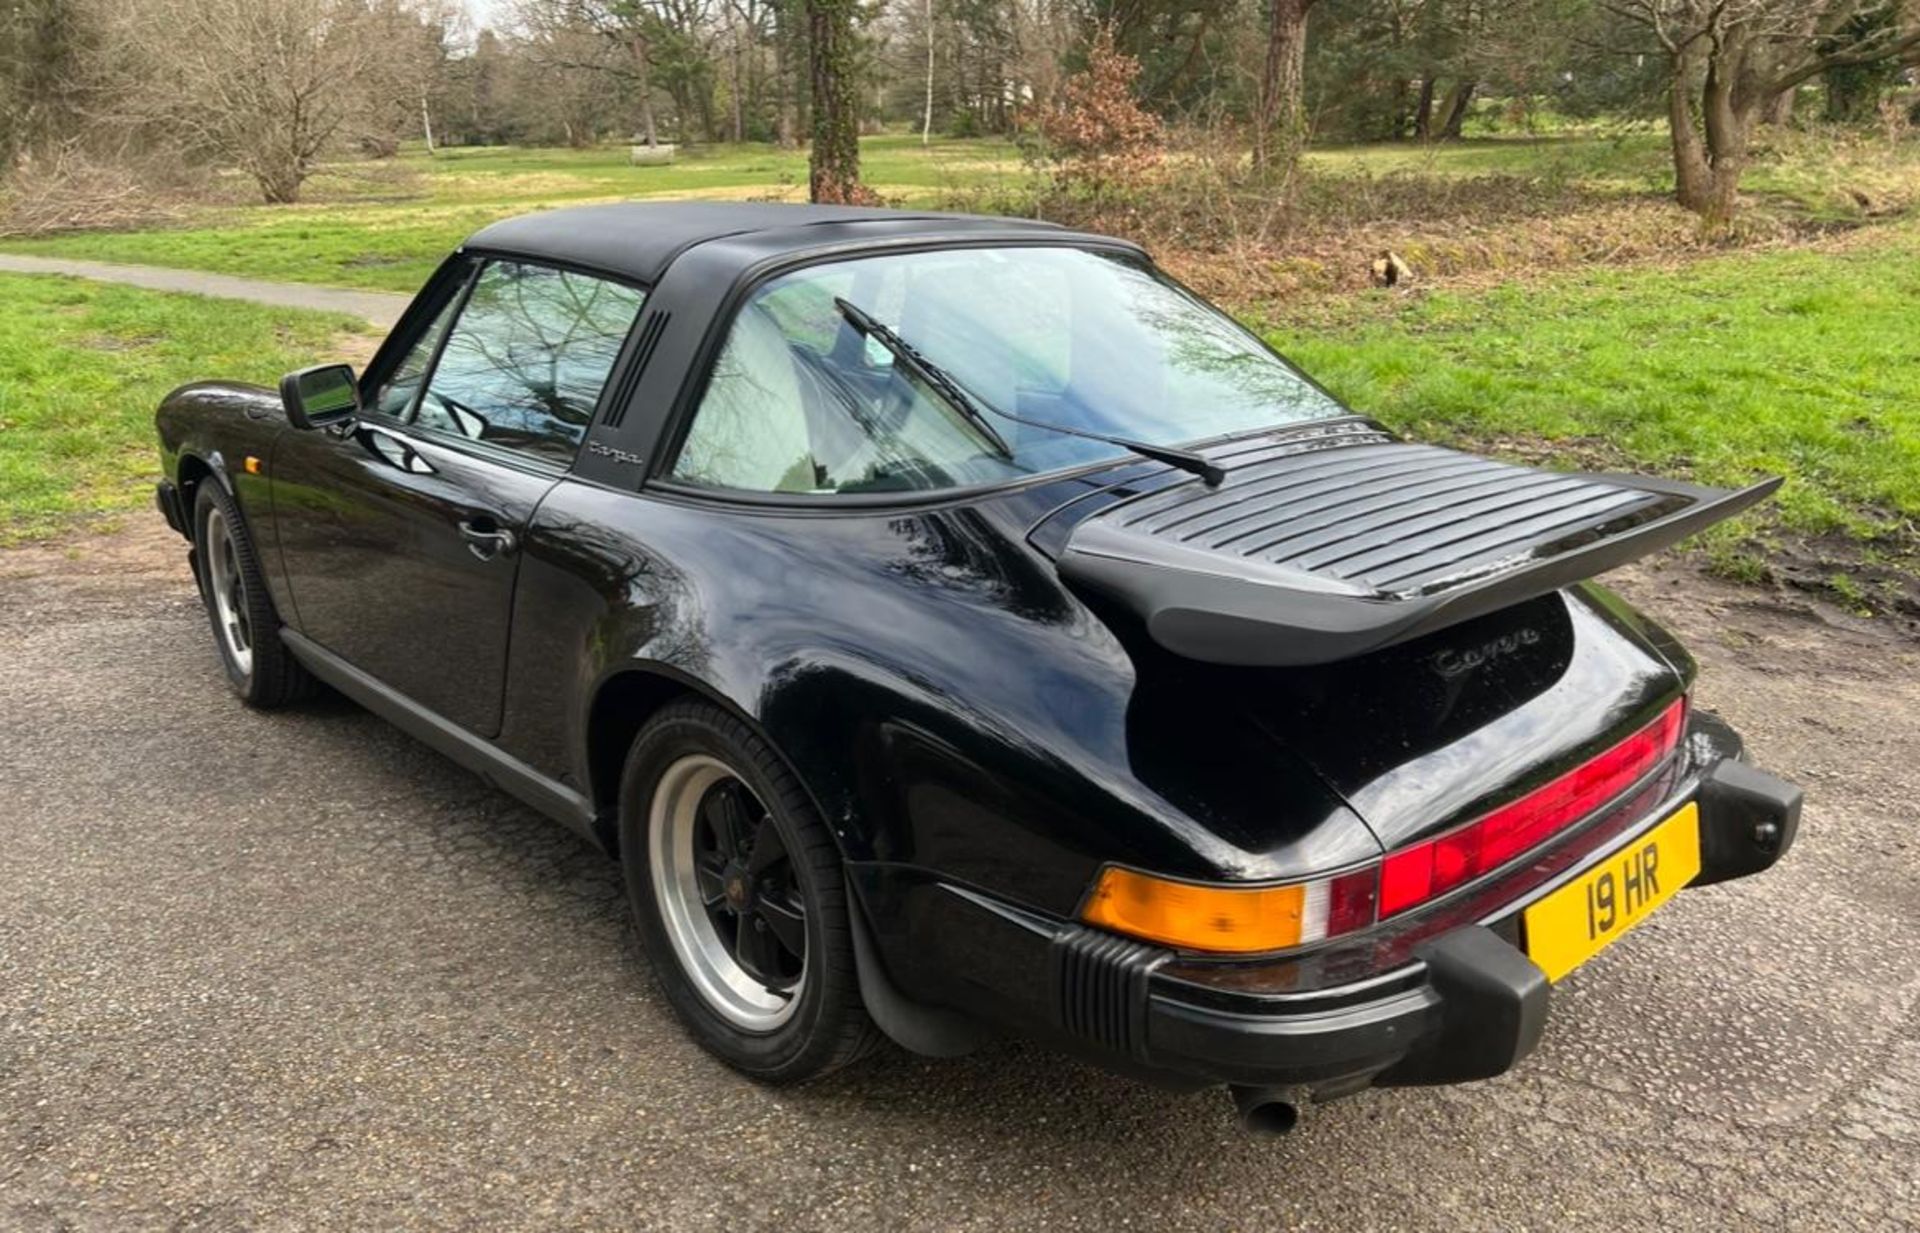 1988 Porsche Carrera Targa 3.2 - 27 yrs ownership, 61,000 miles with only 3500 miles in last 25 yrs - Image 8 of 18